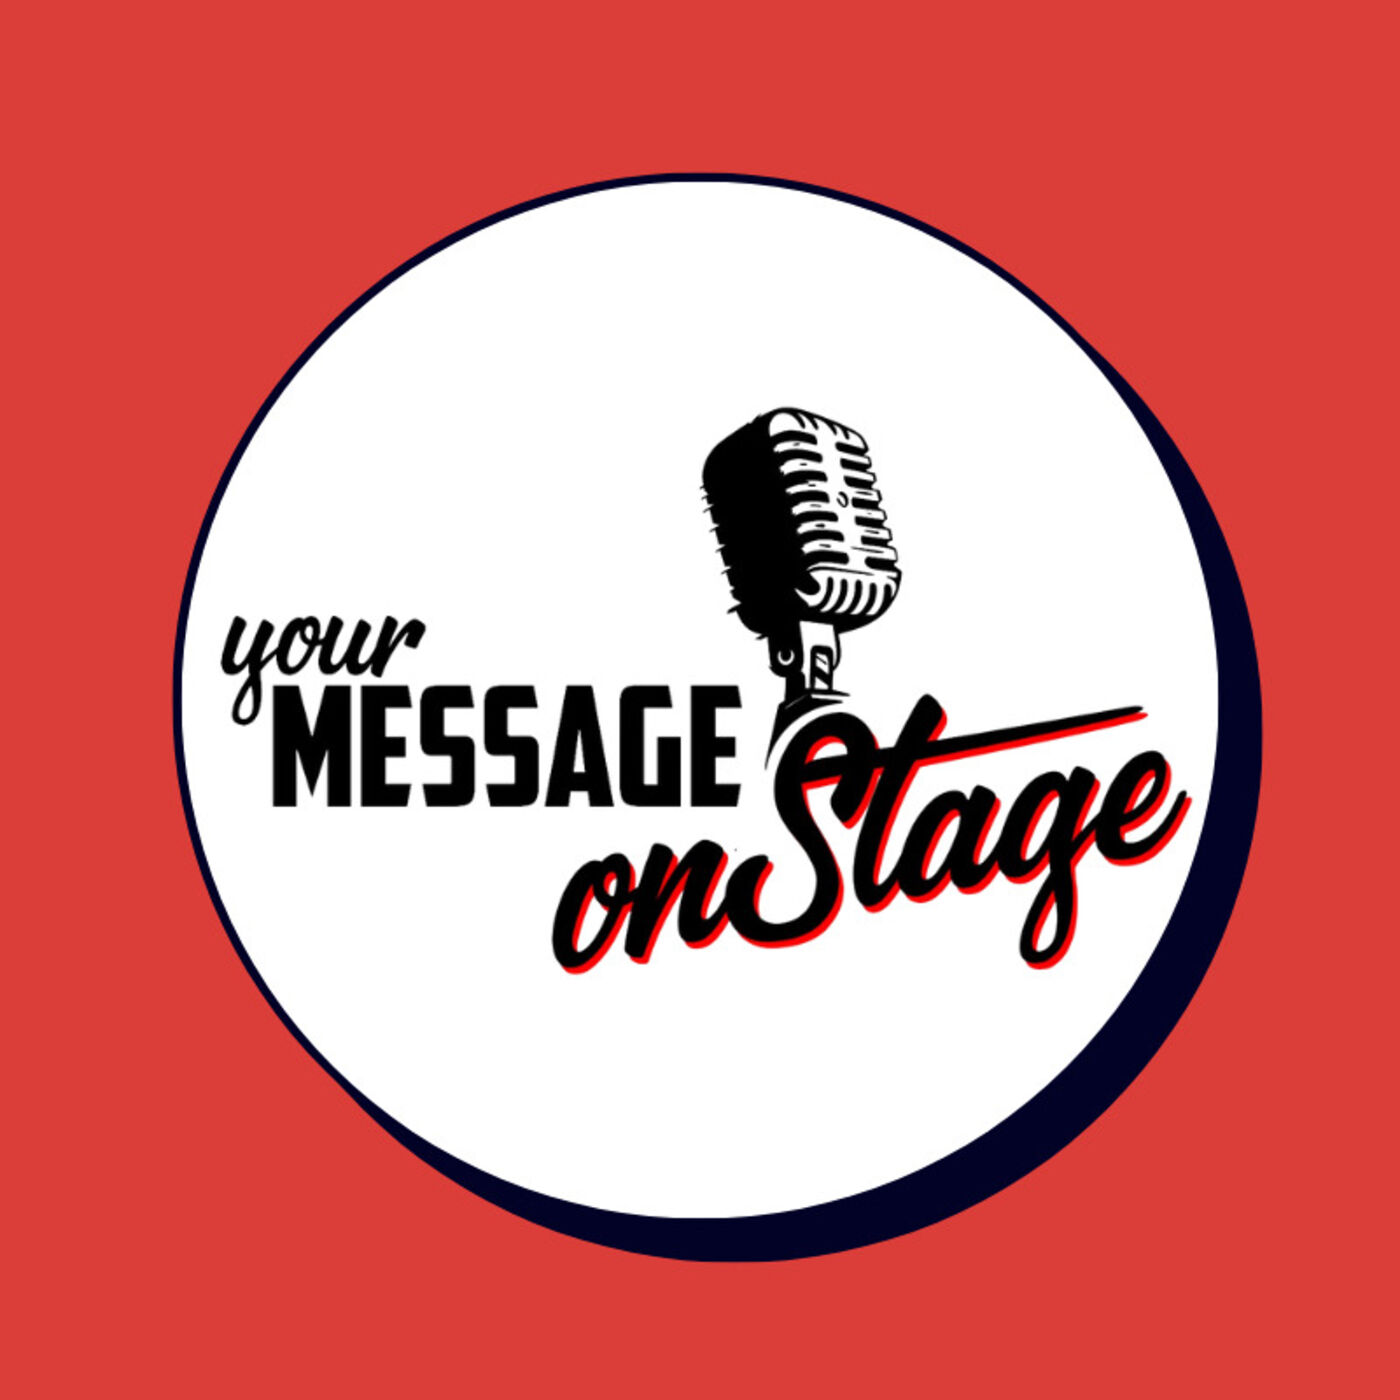 Message on stage Podcast